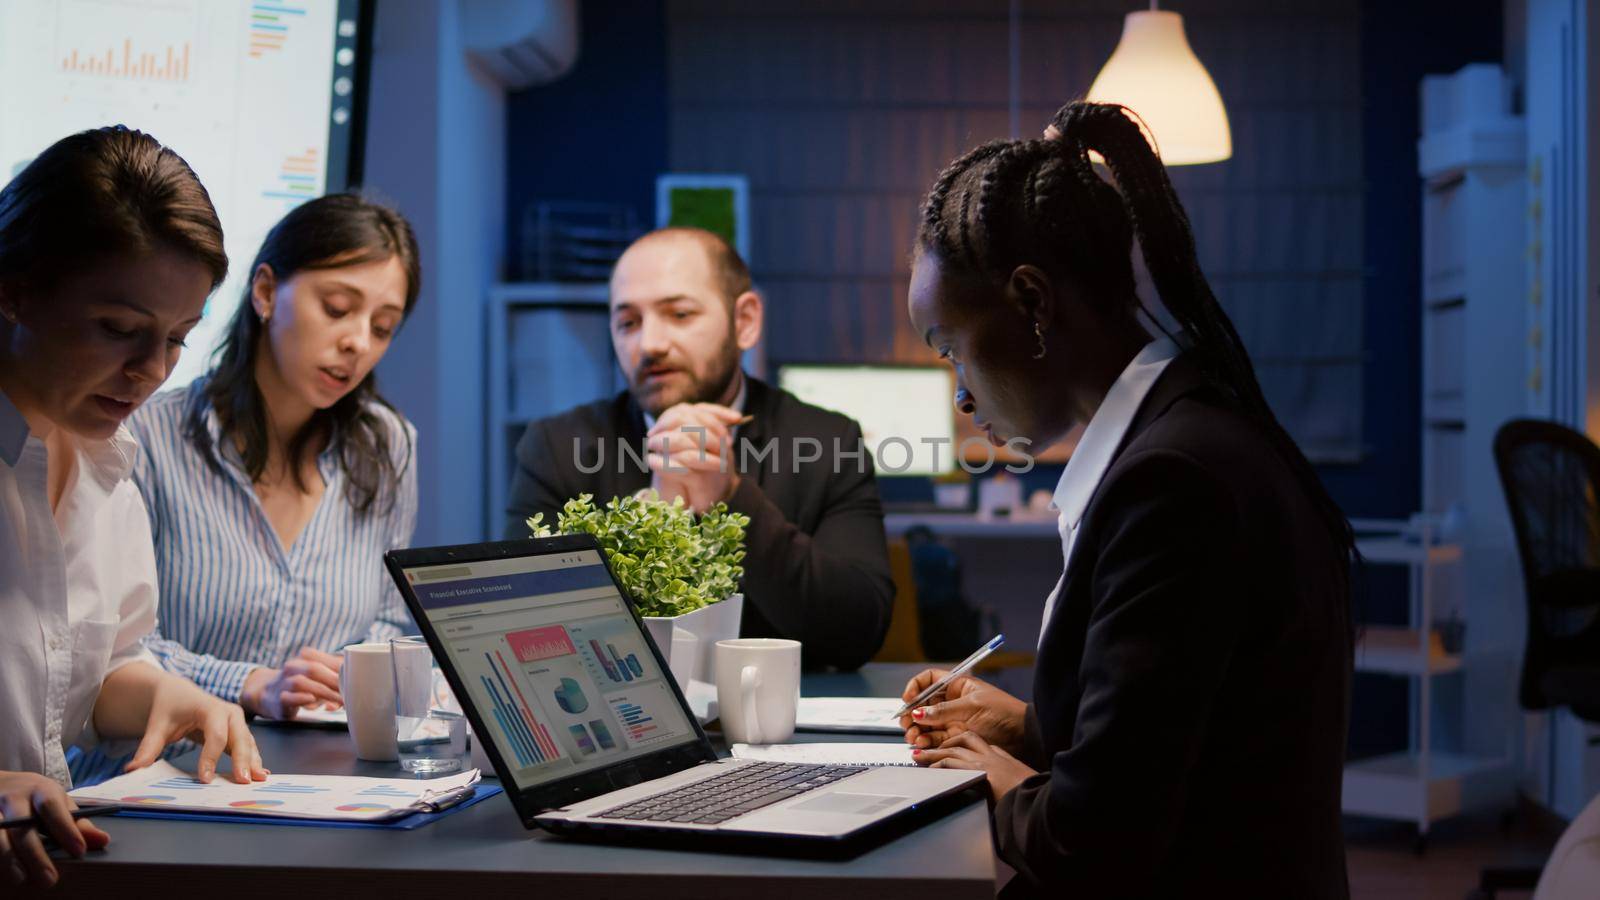 African american businesswoman writing company solution on notebook while diverse teamwork discussing corporate management presentation in meeting room. Multi-ethnic brainstorming strategy ideas